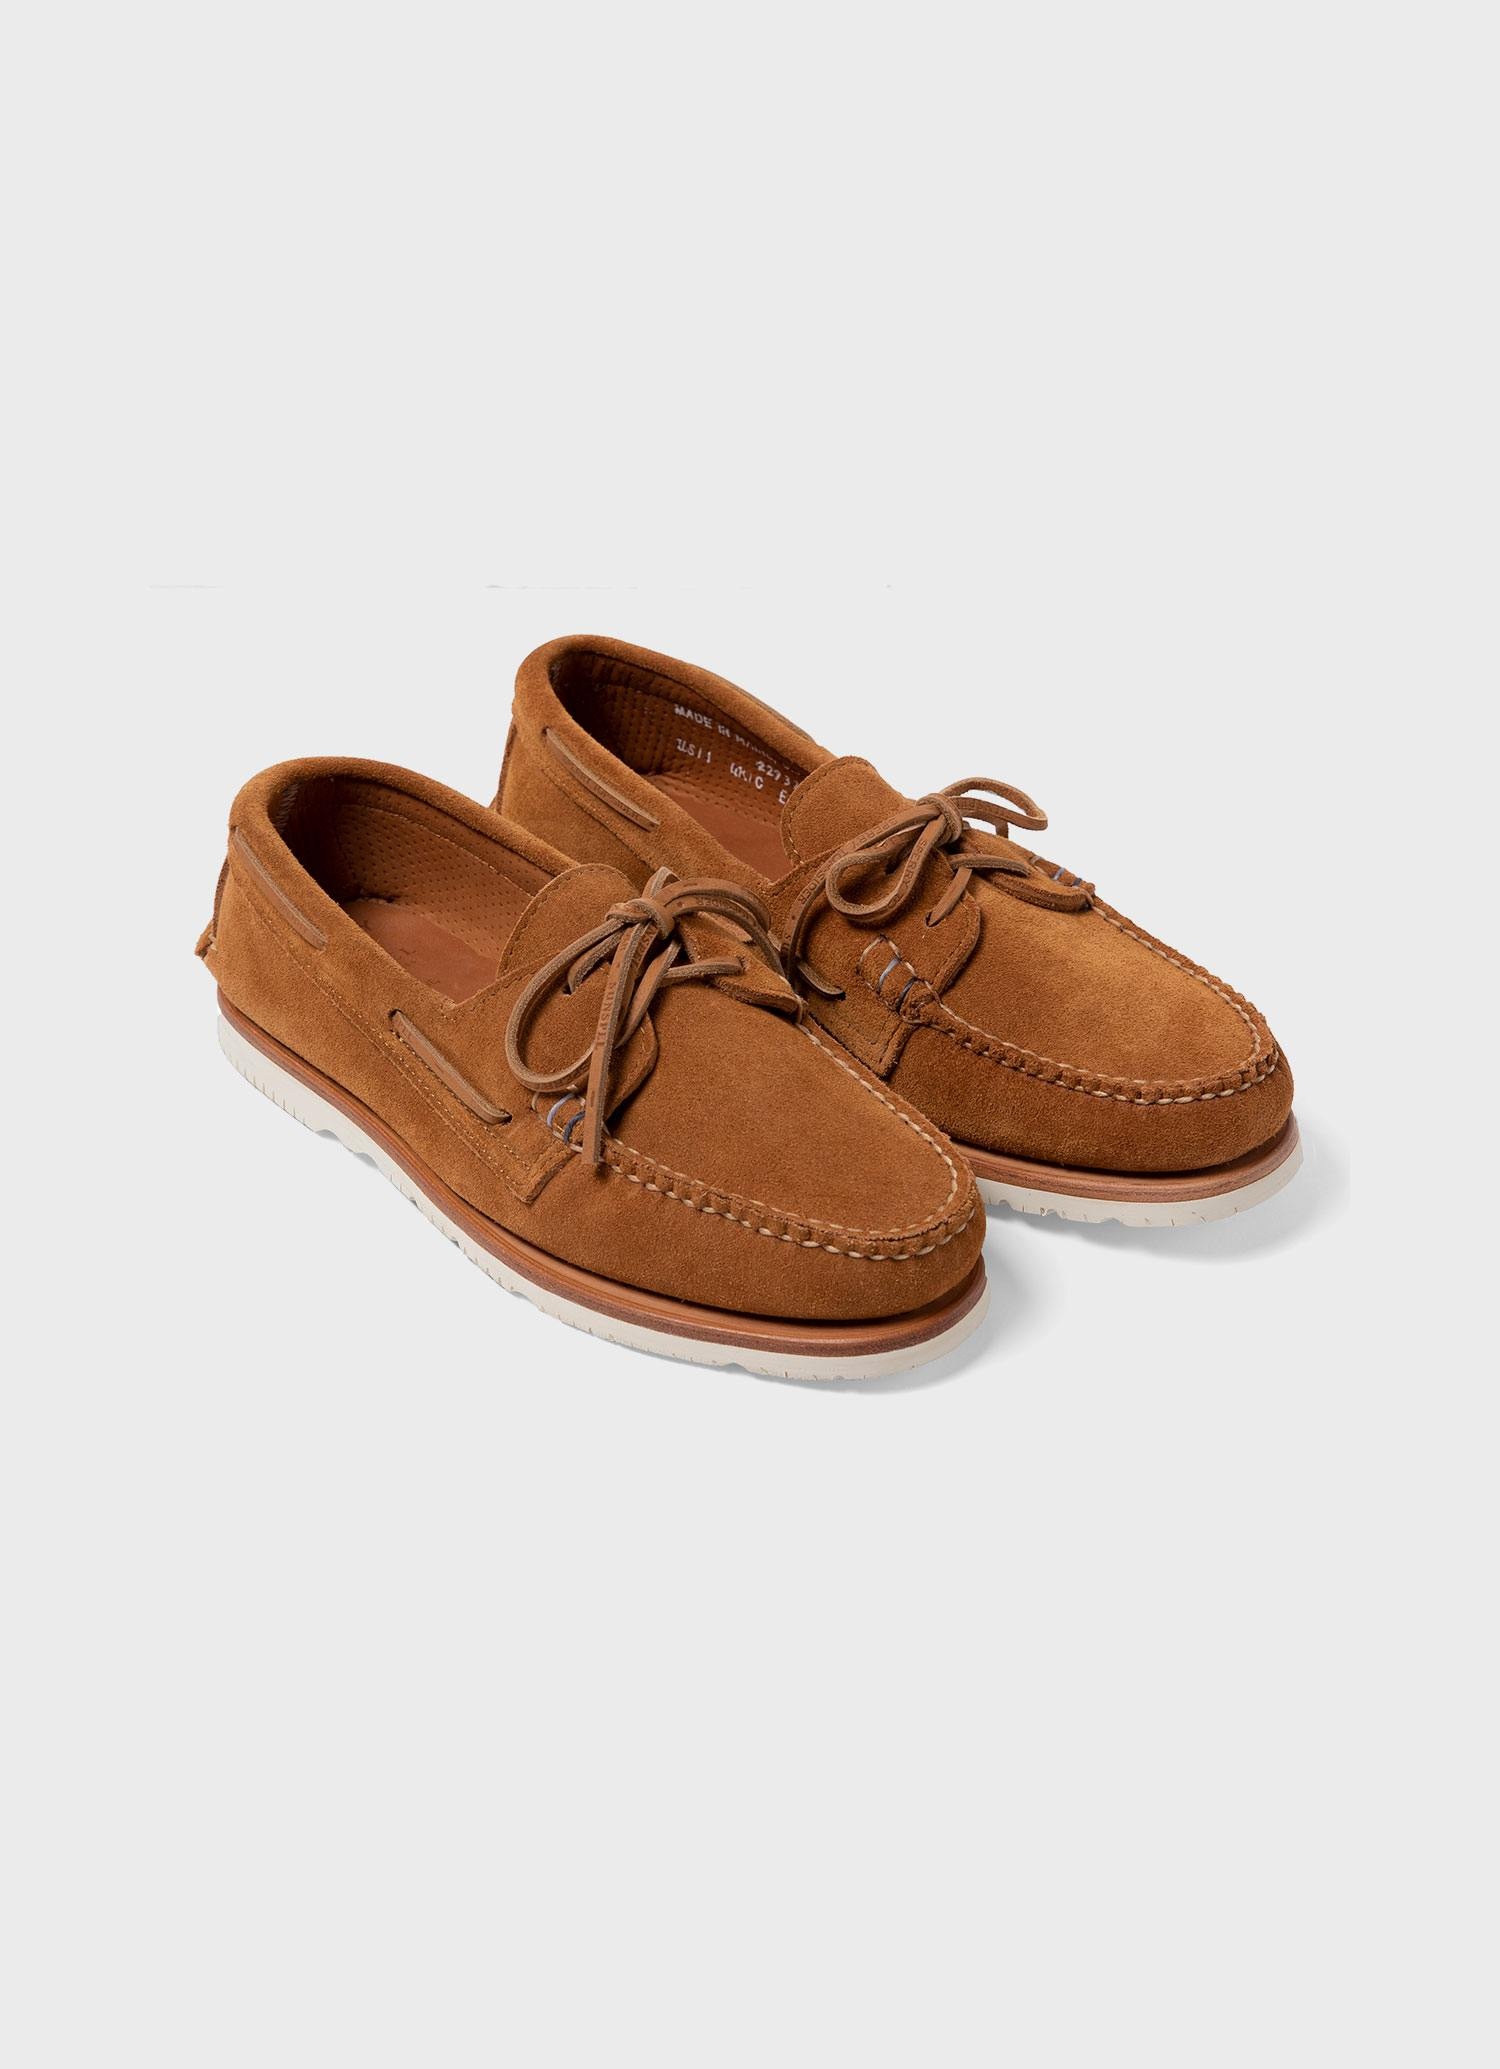 Sunspel and Sperry Suede Boat Shoe - 2